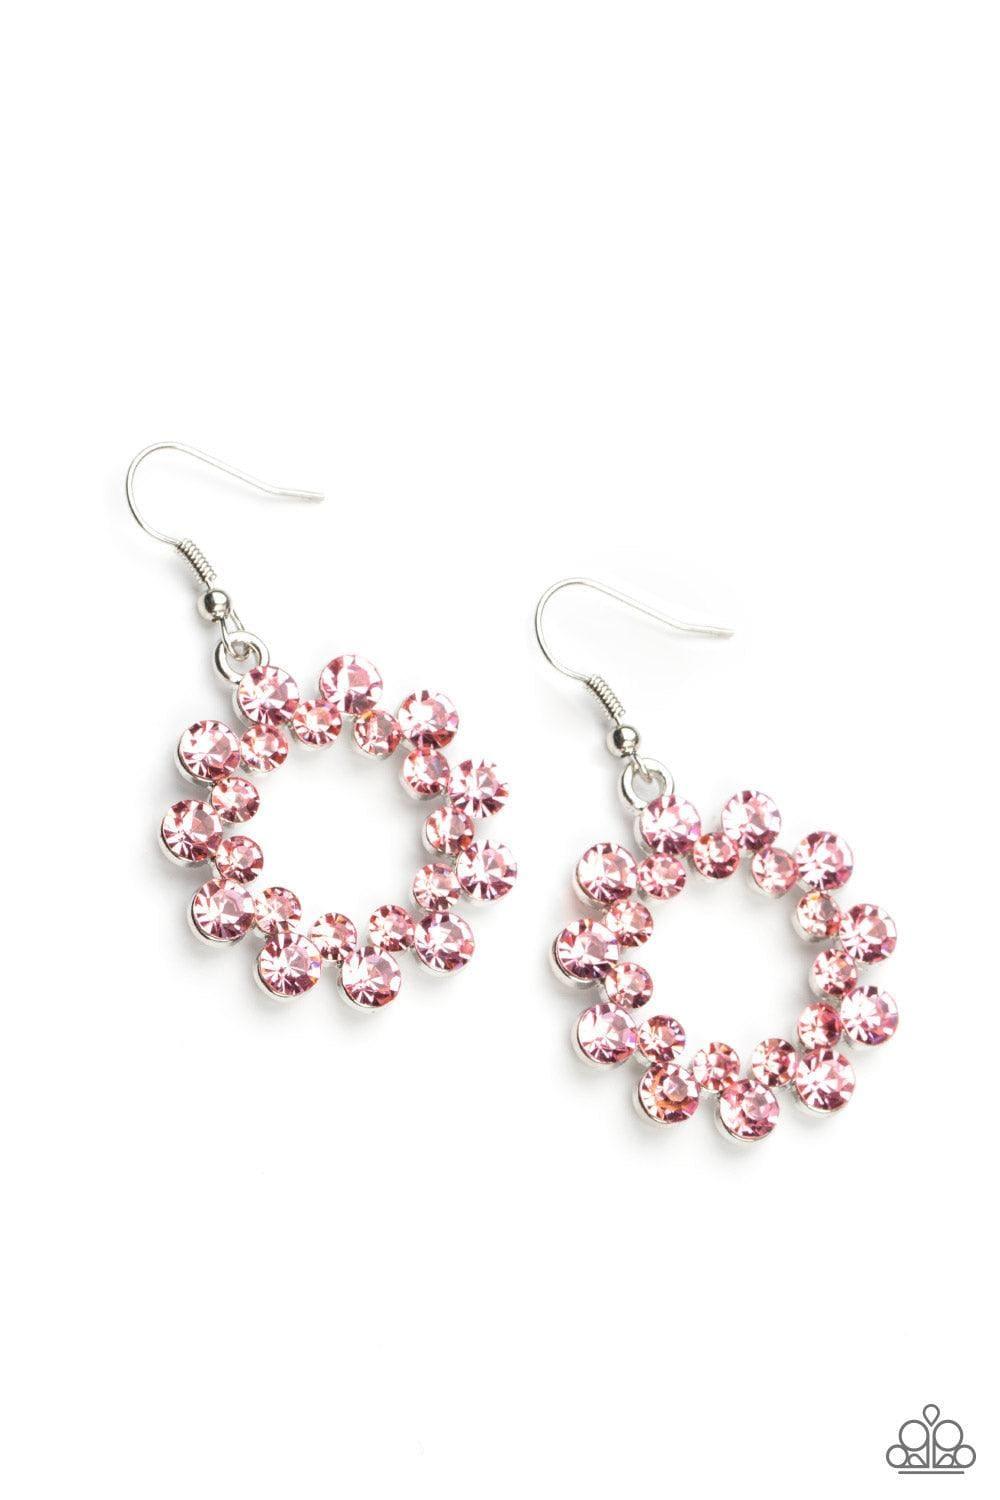 Paparazzi Accessories - Champagne Bubbles - Pink Earrings - Bling by JessieK